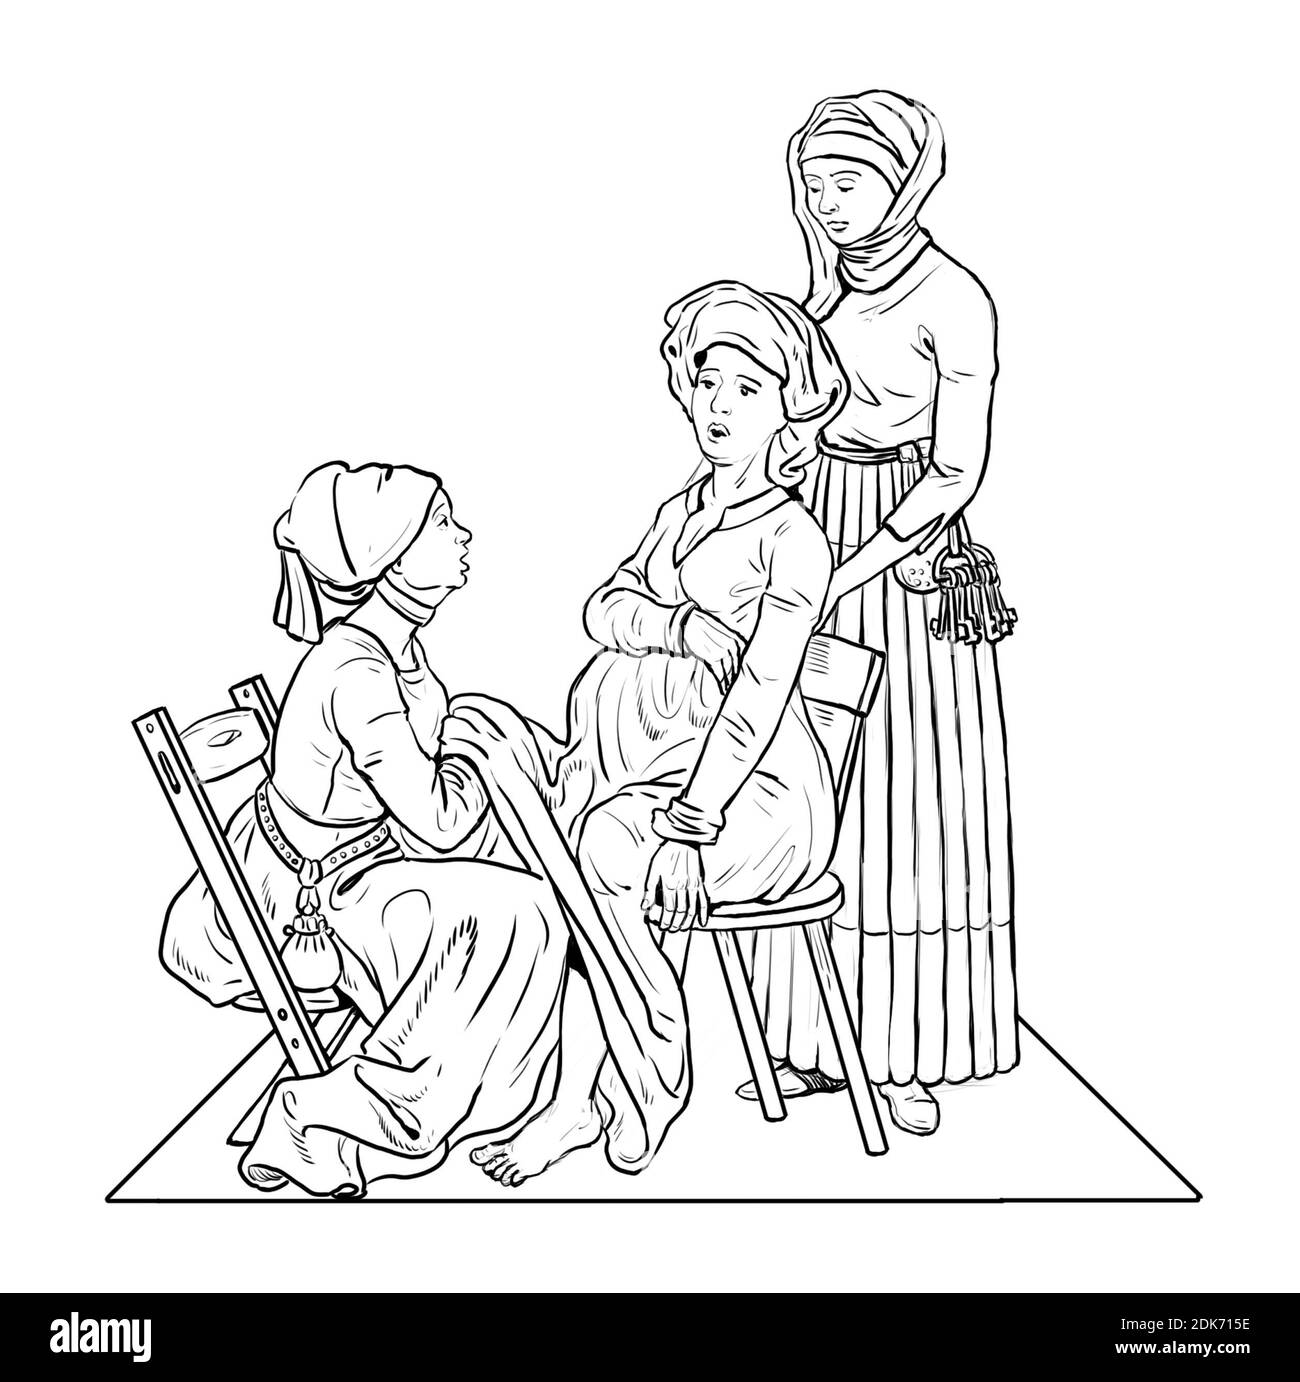 Medieval midwife receives birth of a child. Historical illustration. Stock Photo